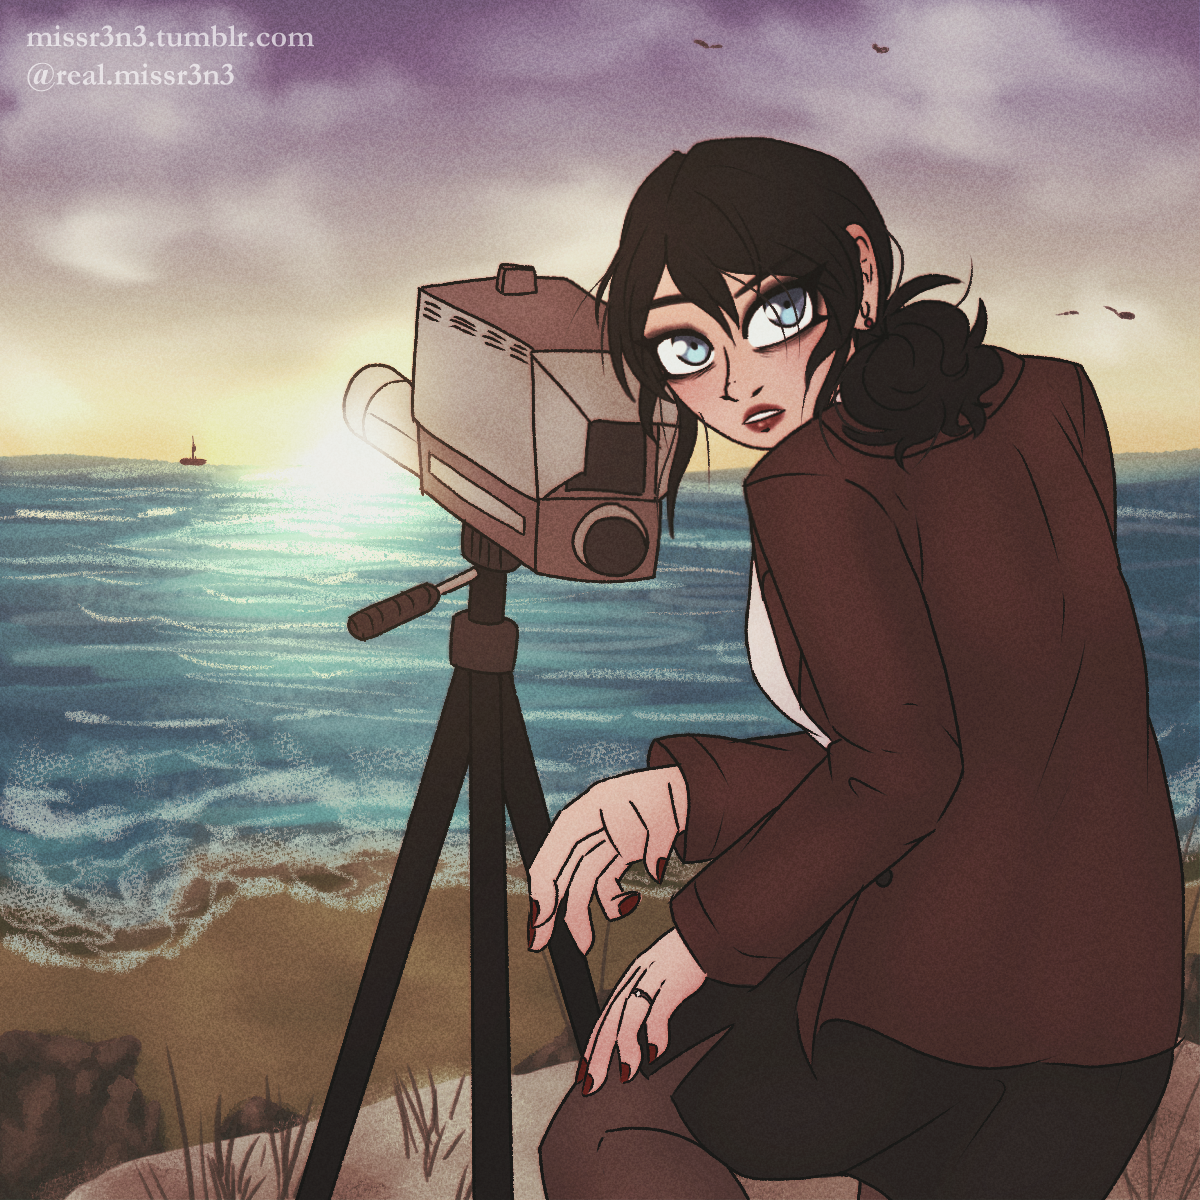 evelyn rayne sitting on a ledge by the coast as she films the waves with an old 70s camera